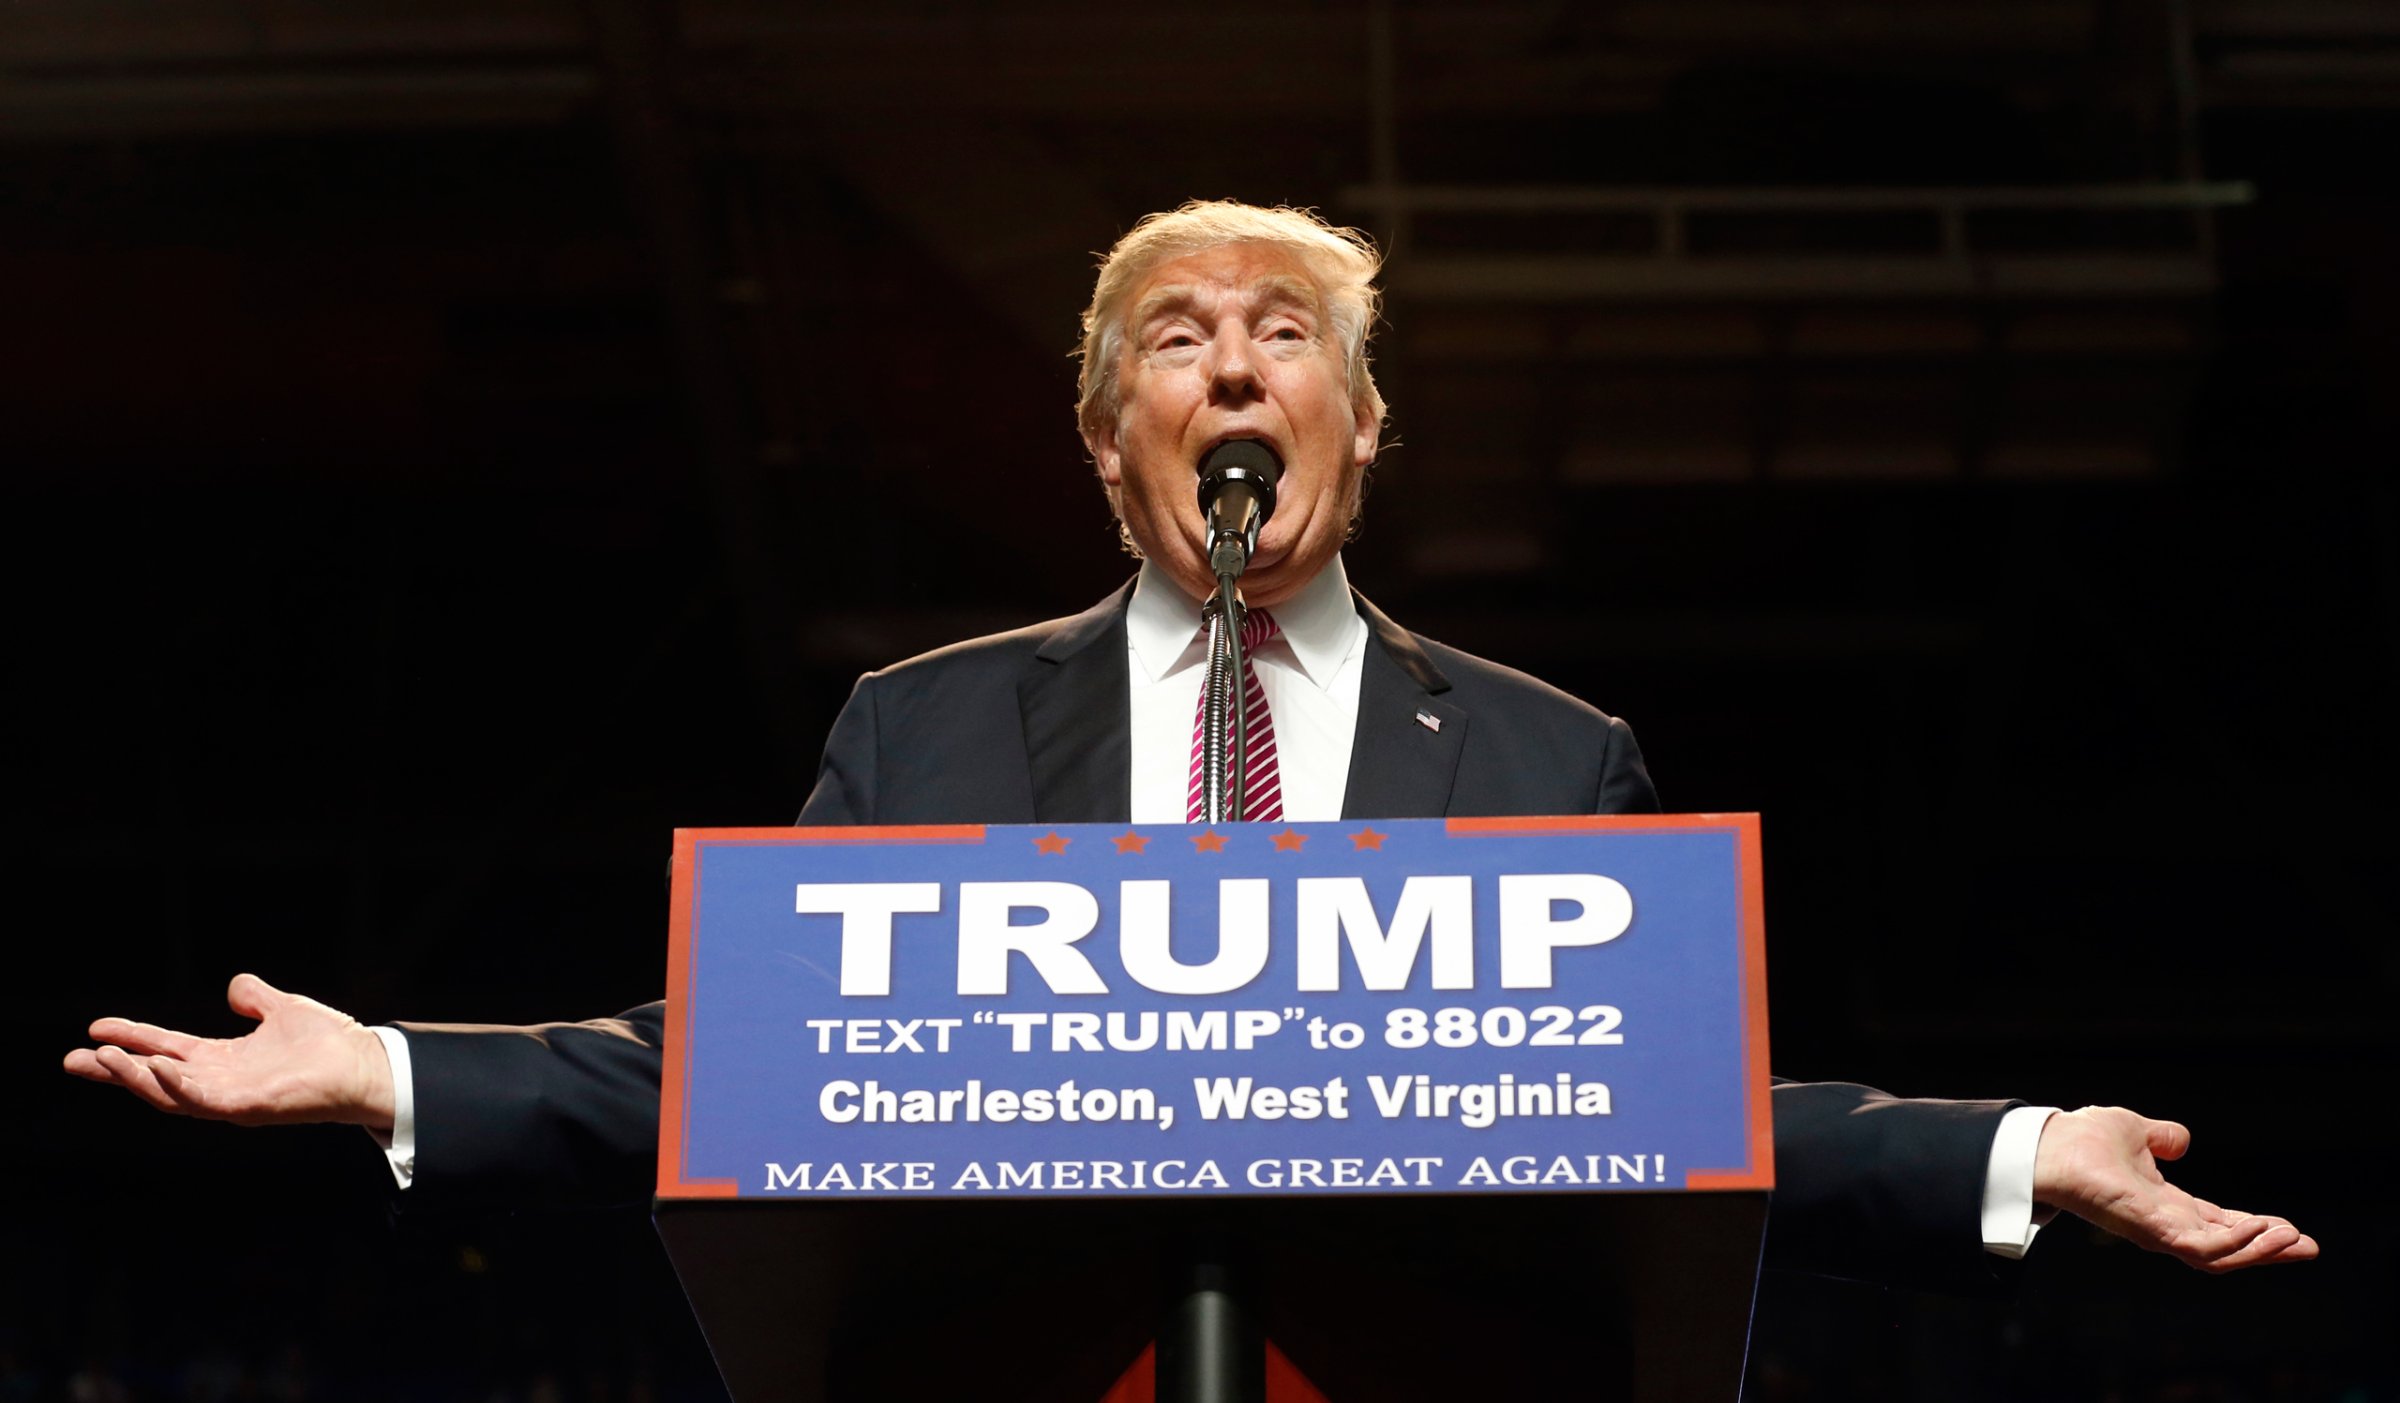 Republican presidential candidate Donald Trump gestures during a rally in Charleston, W.Va., Thursday, May 5, 2016. (AP Photo/Steve Helber)